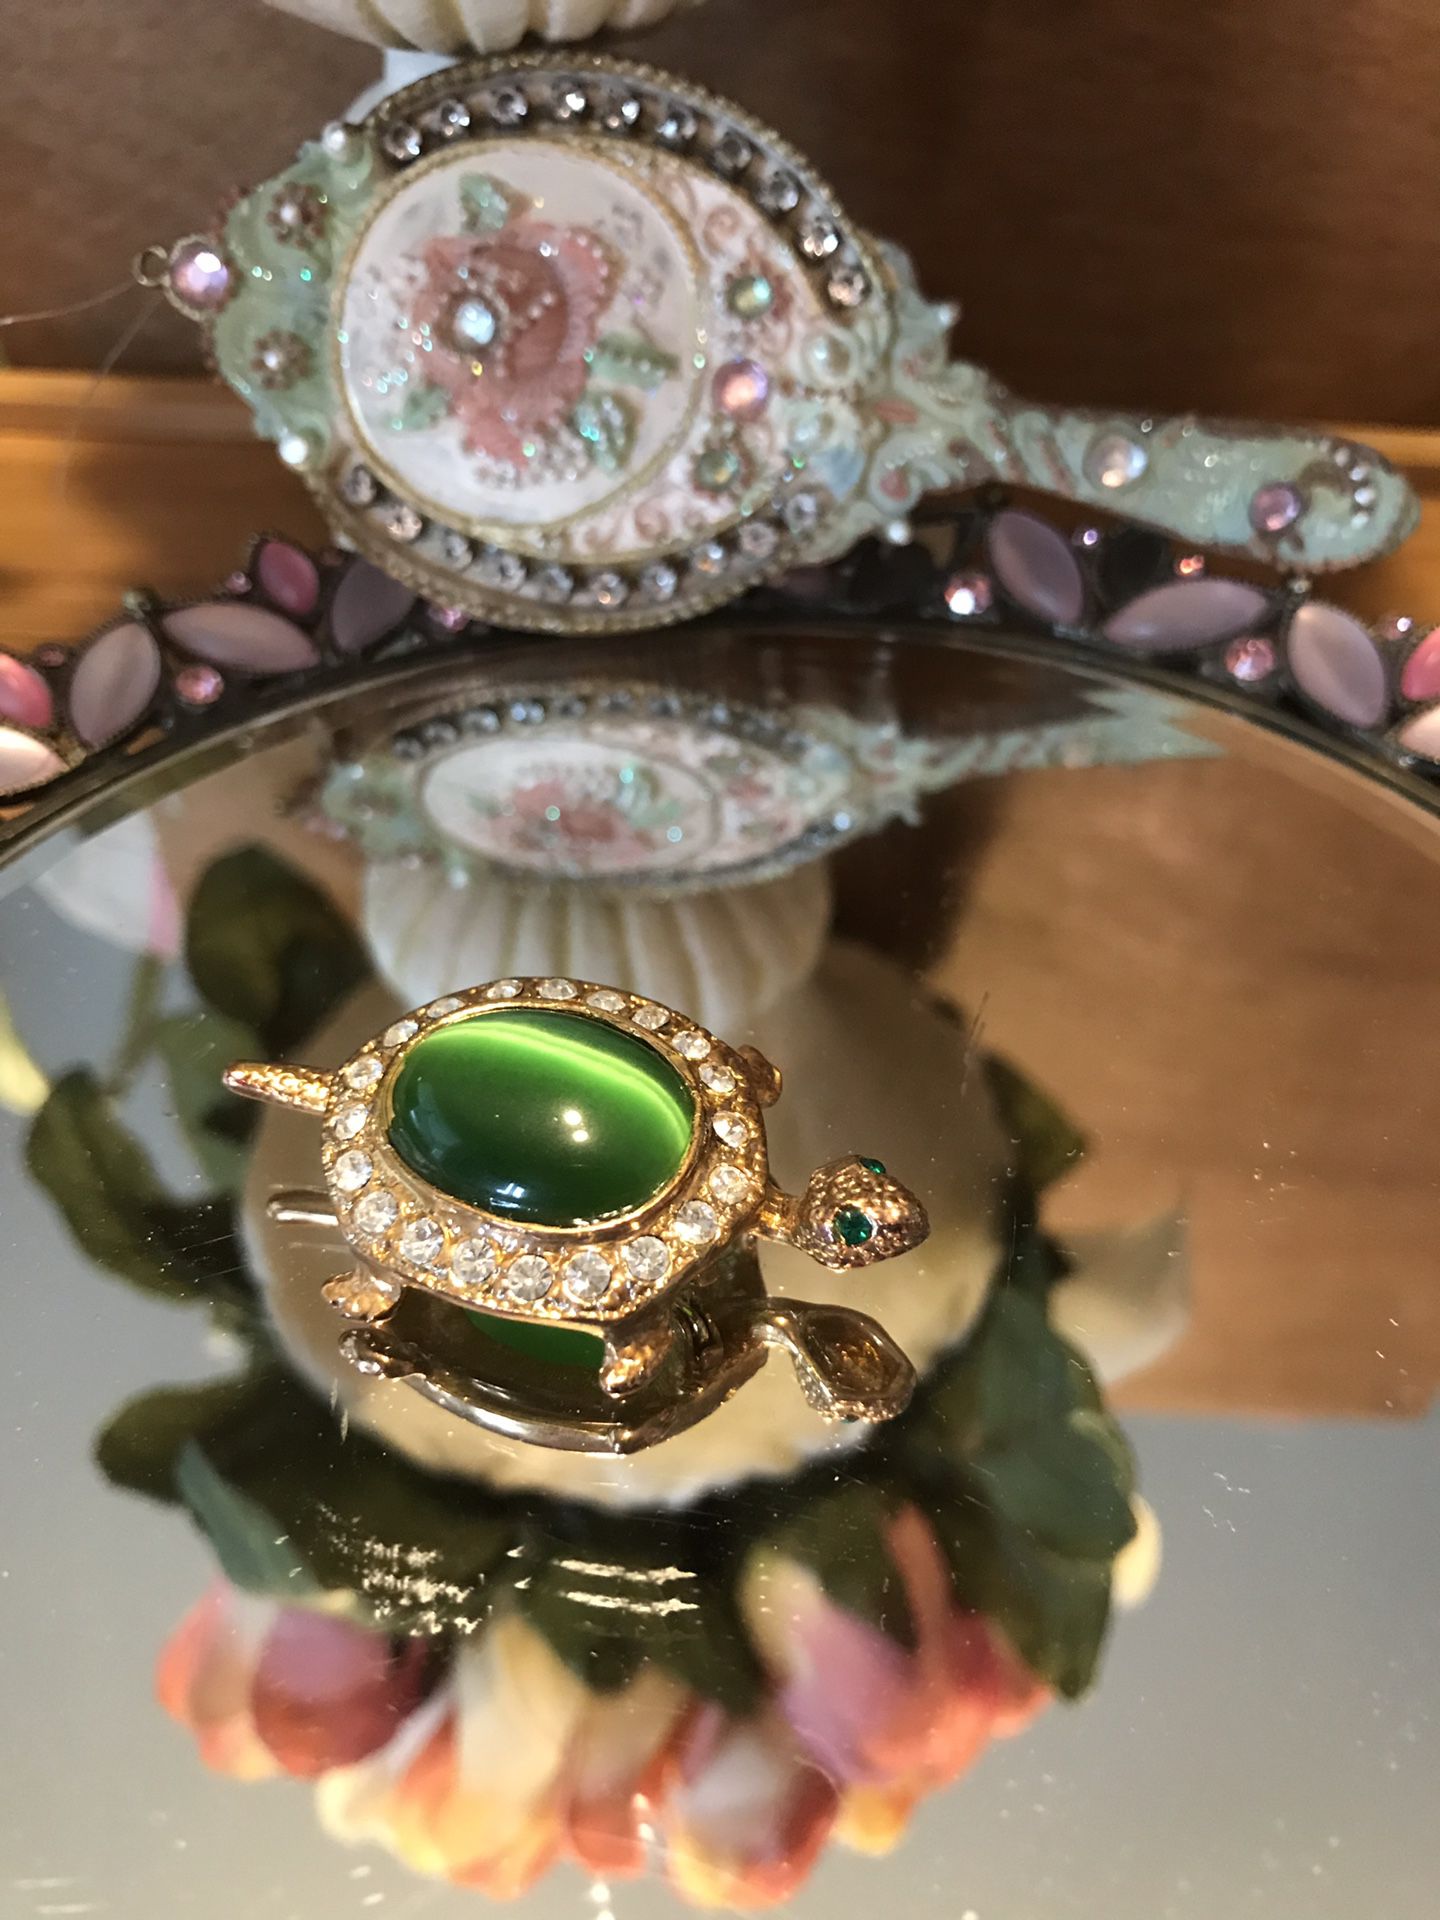 Beautiful!! Gold Turtle Pin/Brooch with big Green Stone in the center with surrounding diamond crystals